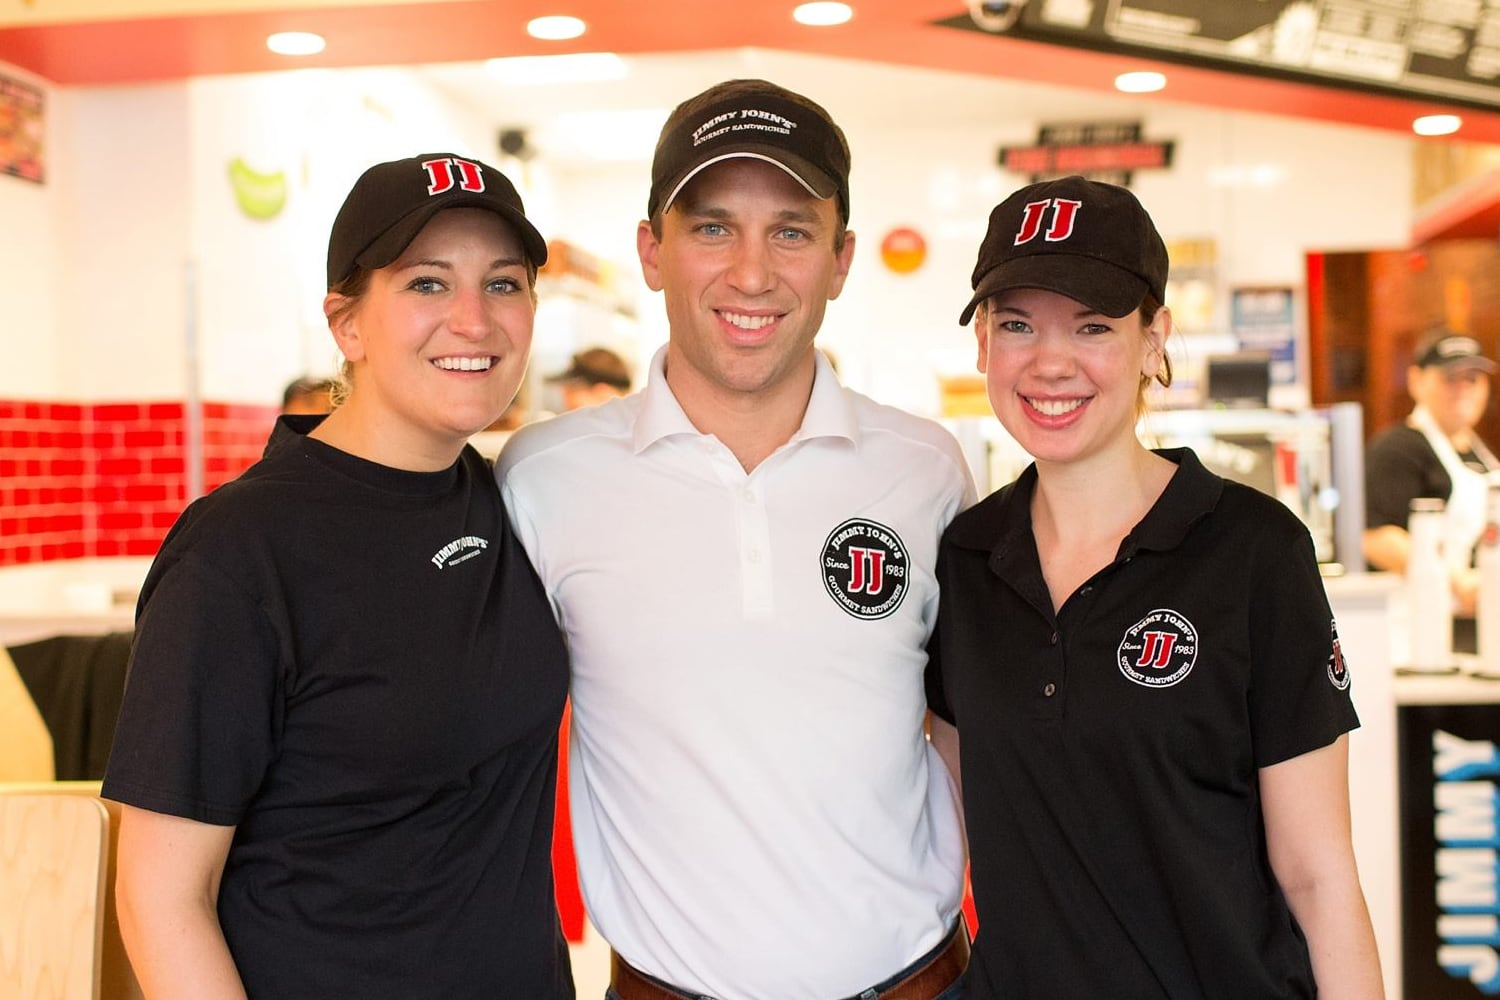 employees of jimmy johns